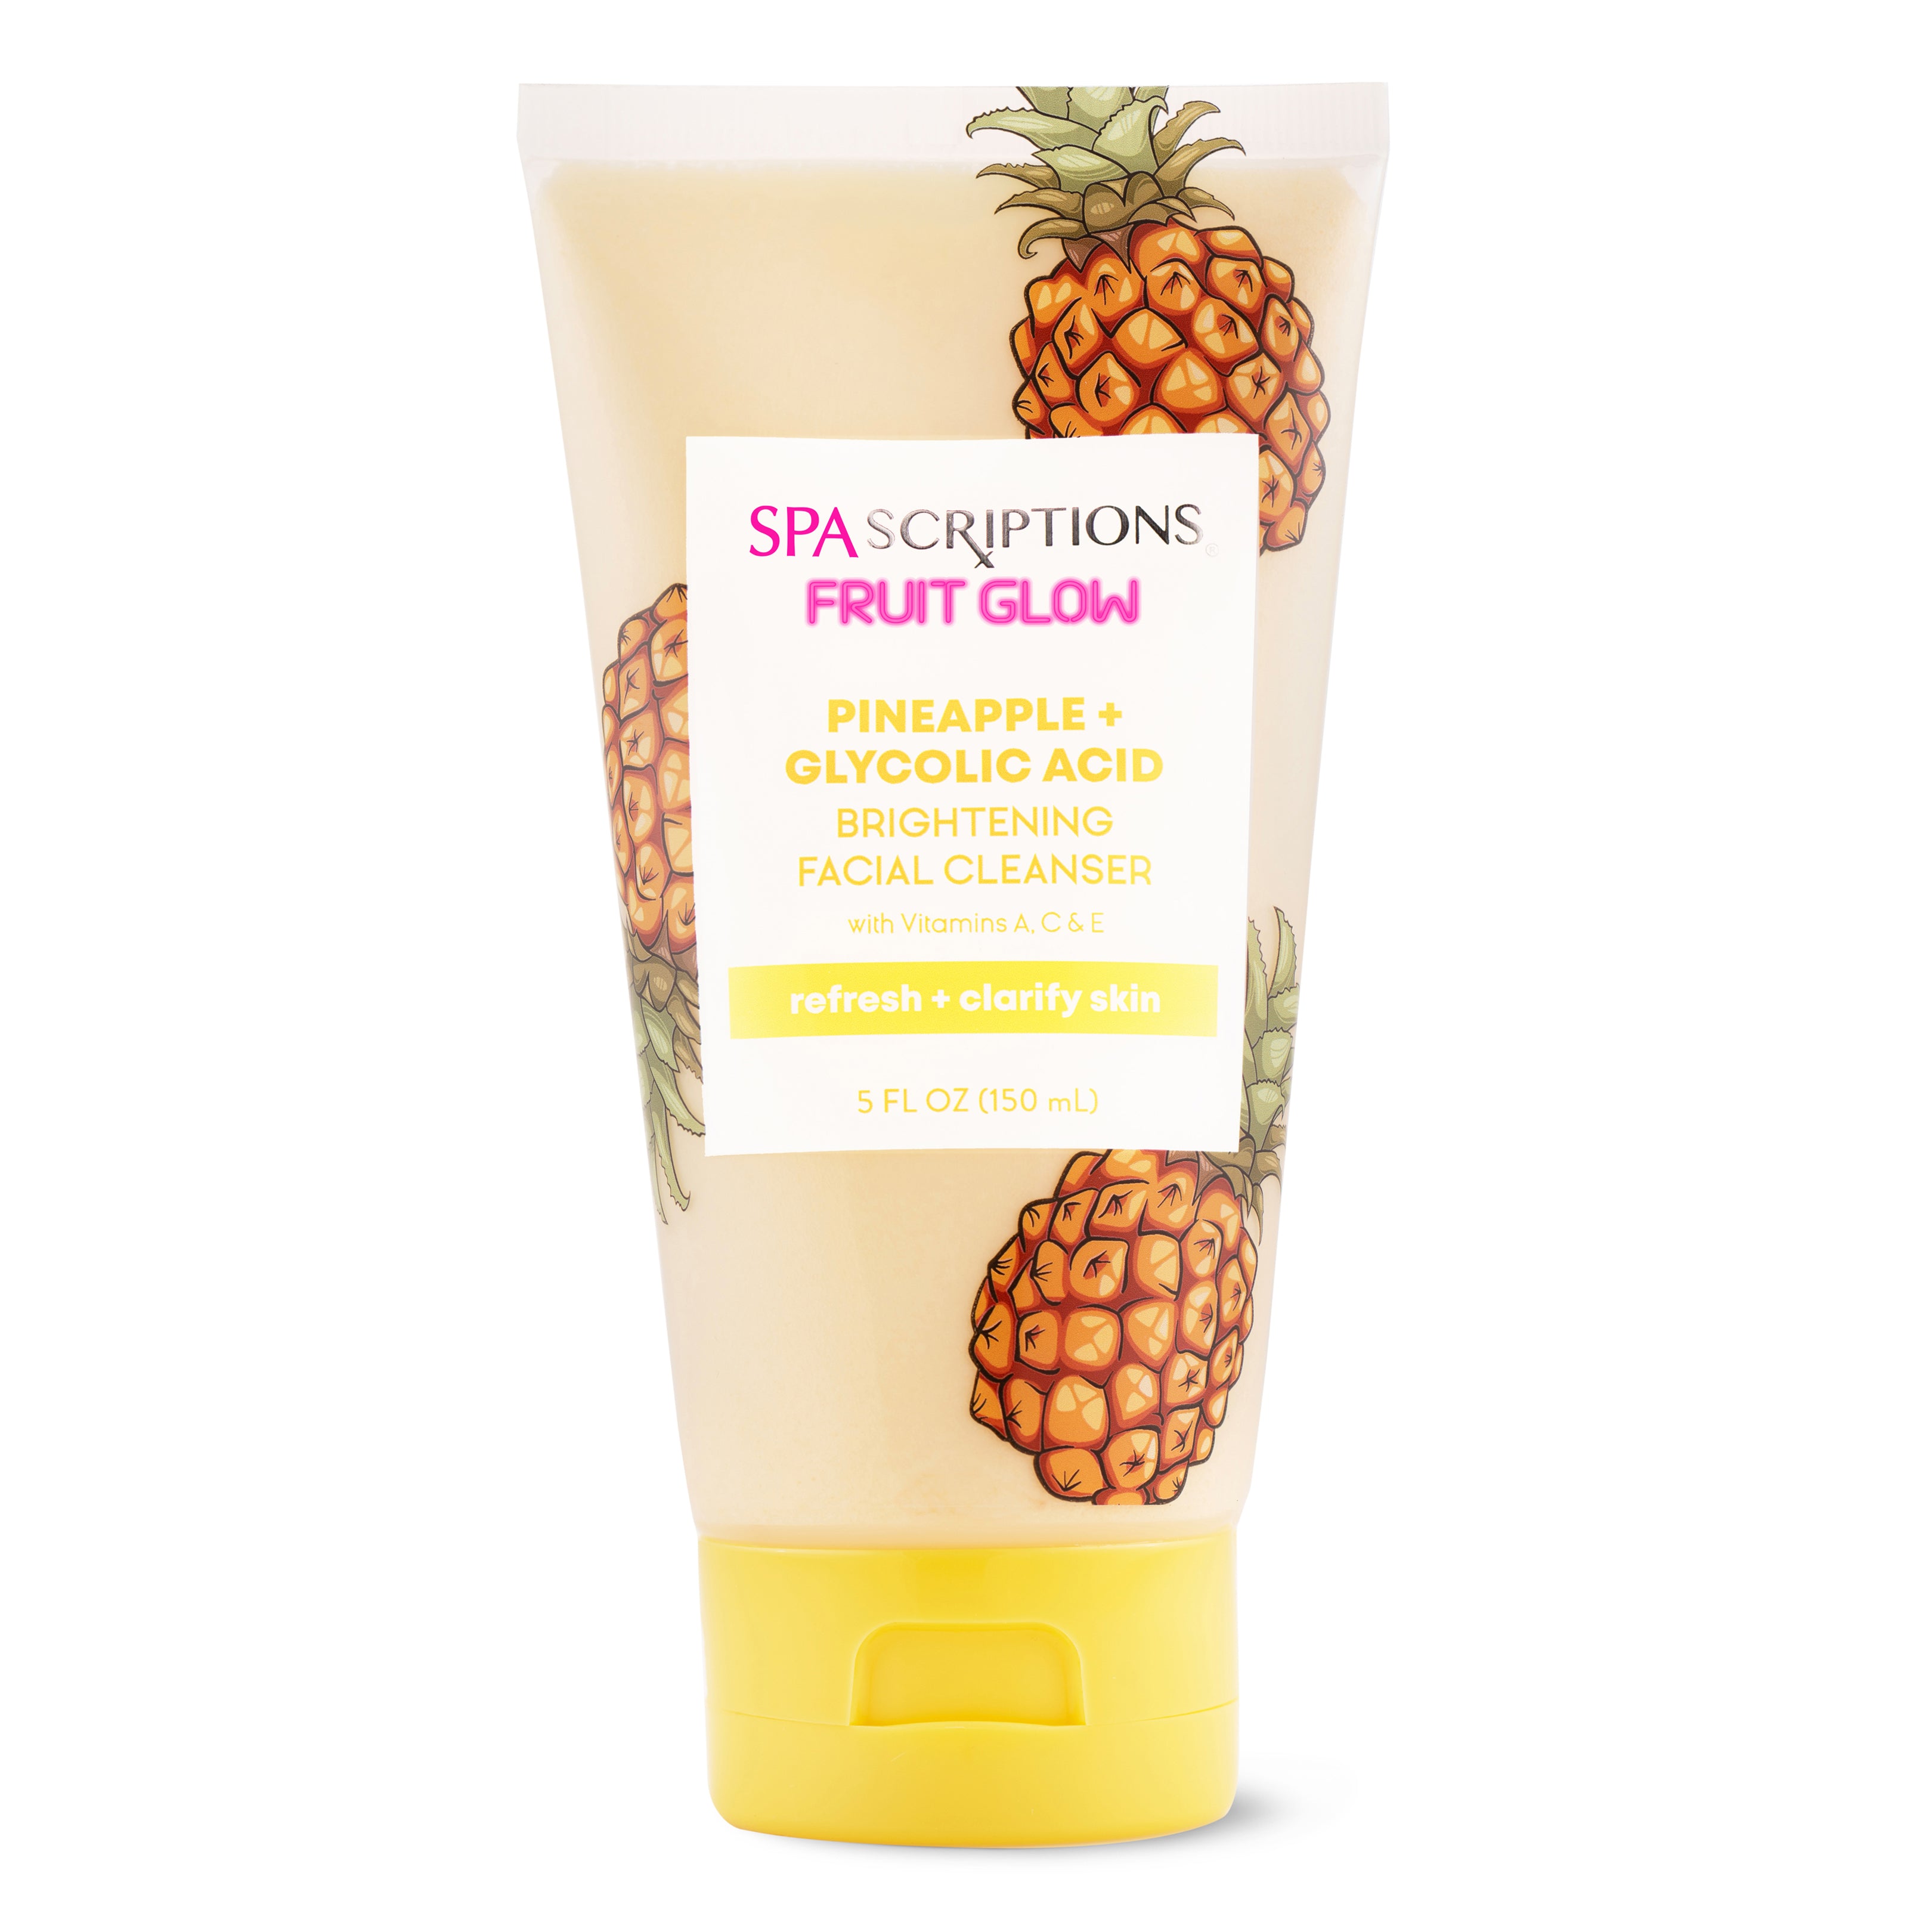 Fruit Glow Pineapple + Glycolic Acid Brightening Facial Cleanser